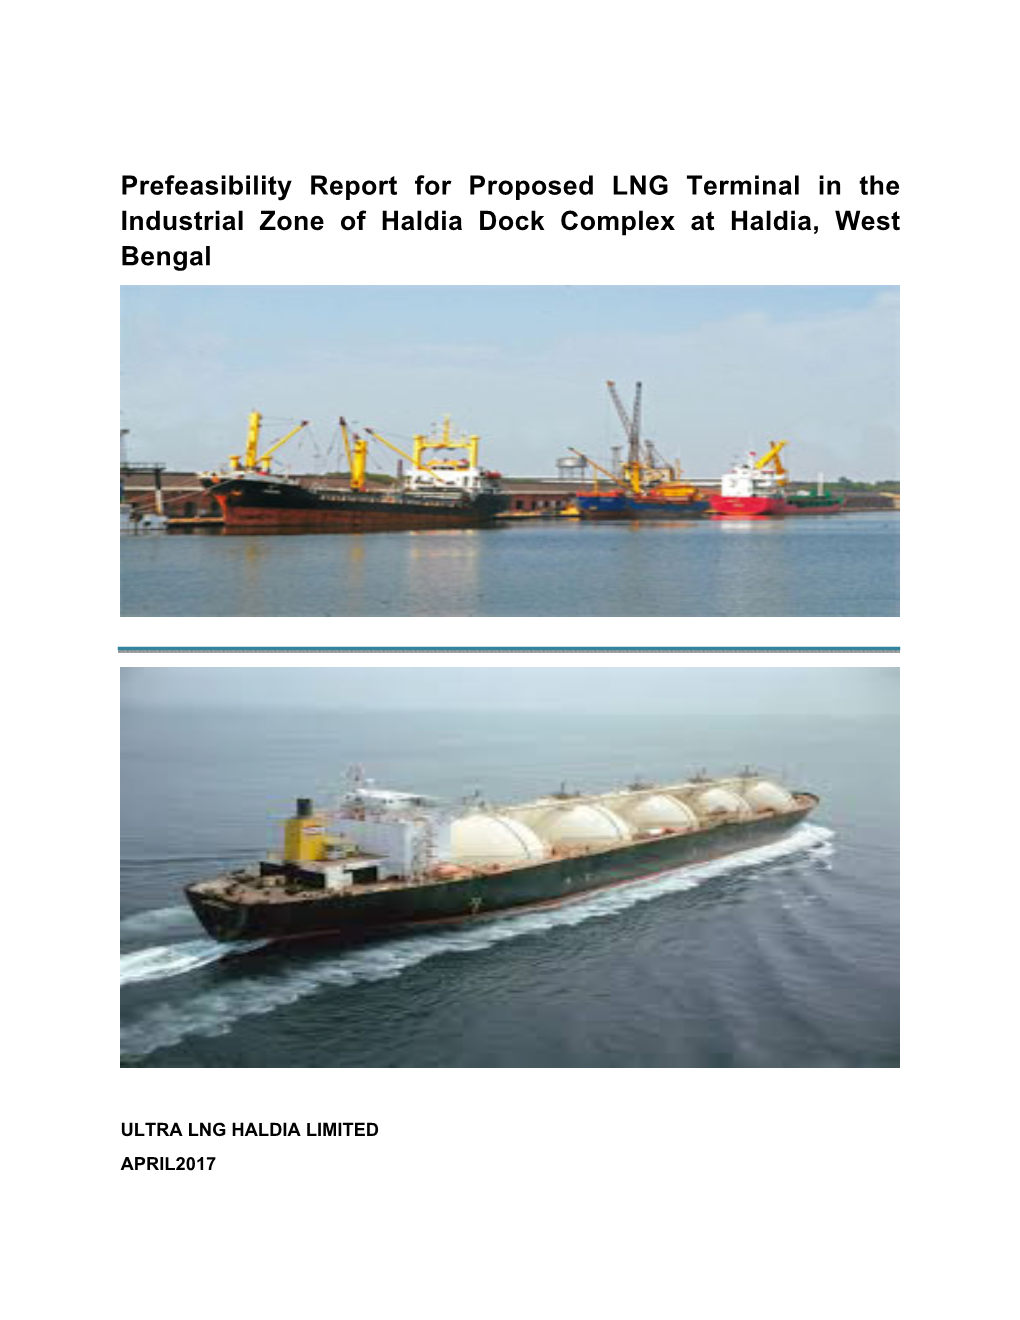 Prefeasibility Report for Proposed LNG Terminal in the Industrial Zone of Haldia Dock Complex at Haldia, West Bengal